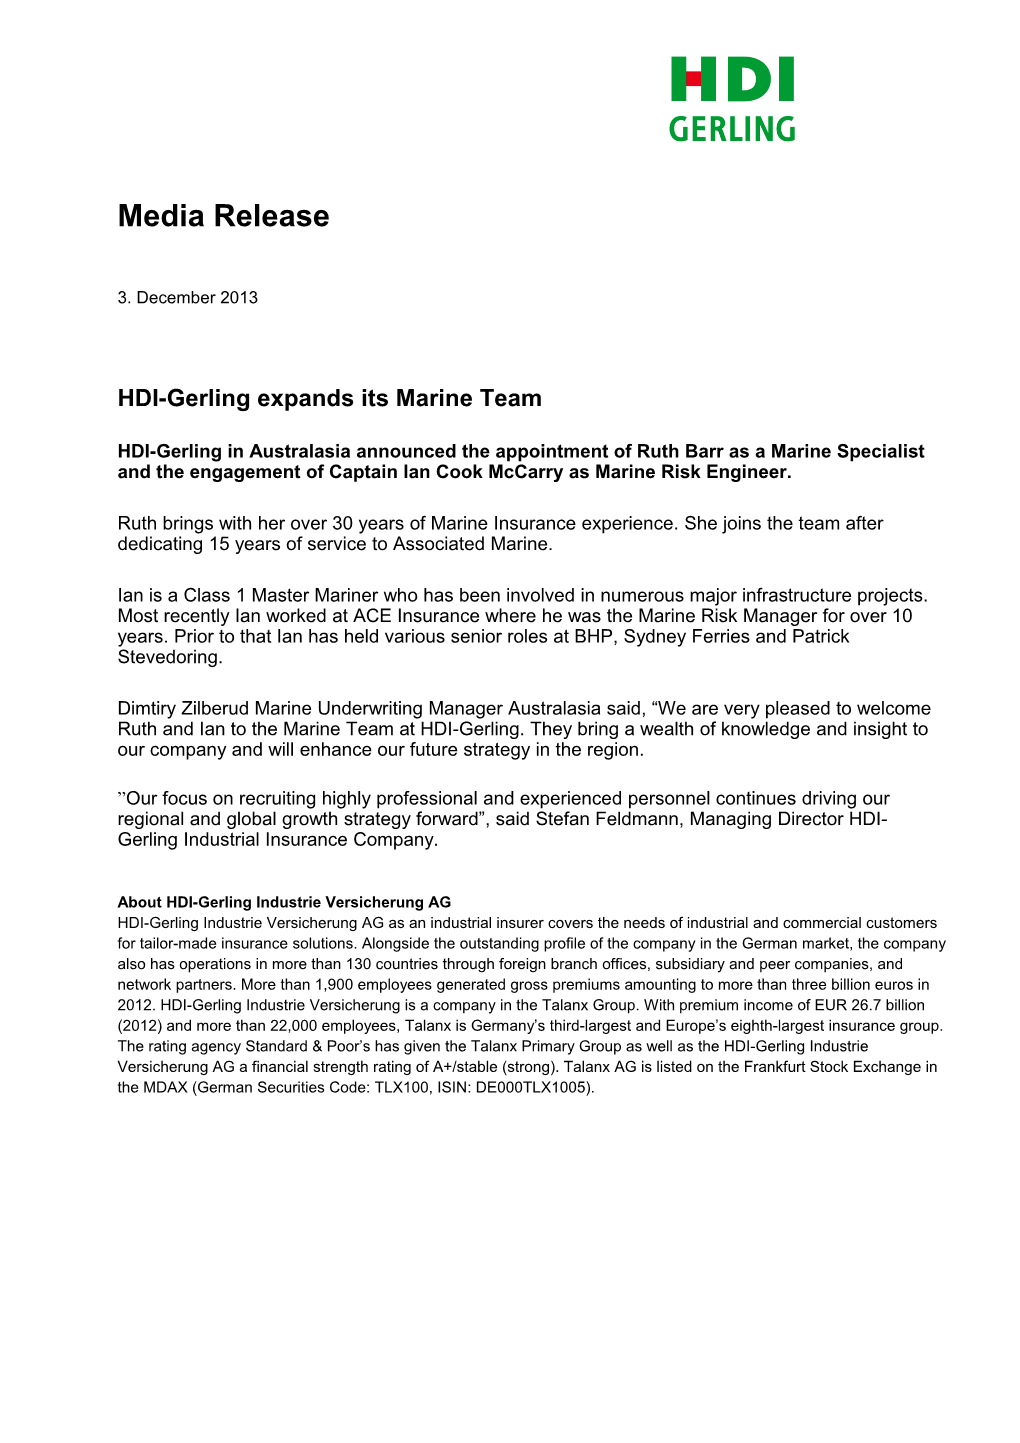 HDI-Gerling Expands Its Marine Team